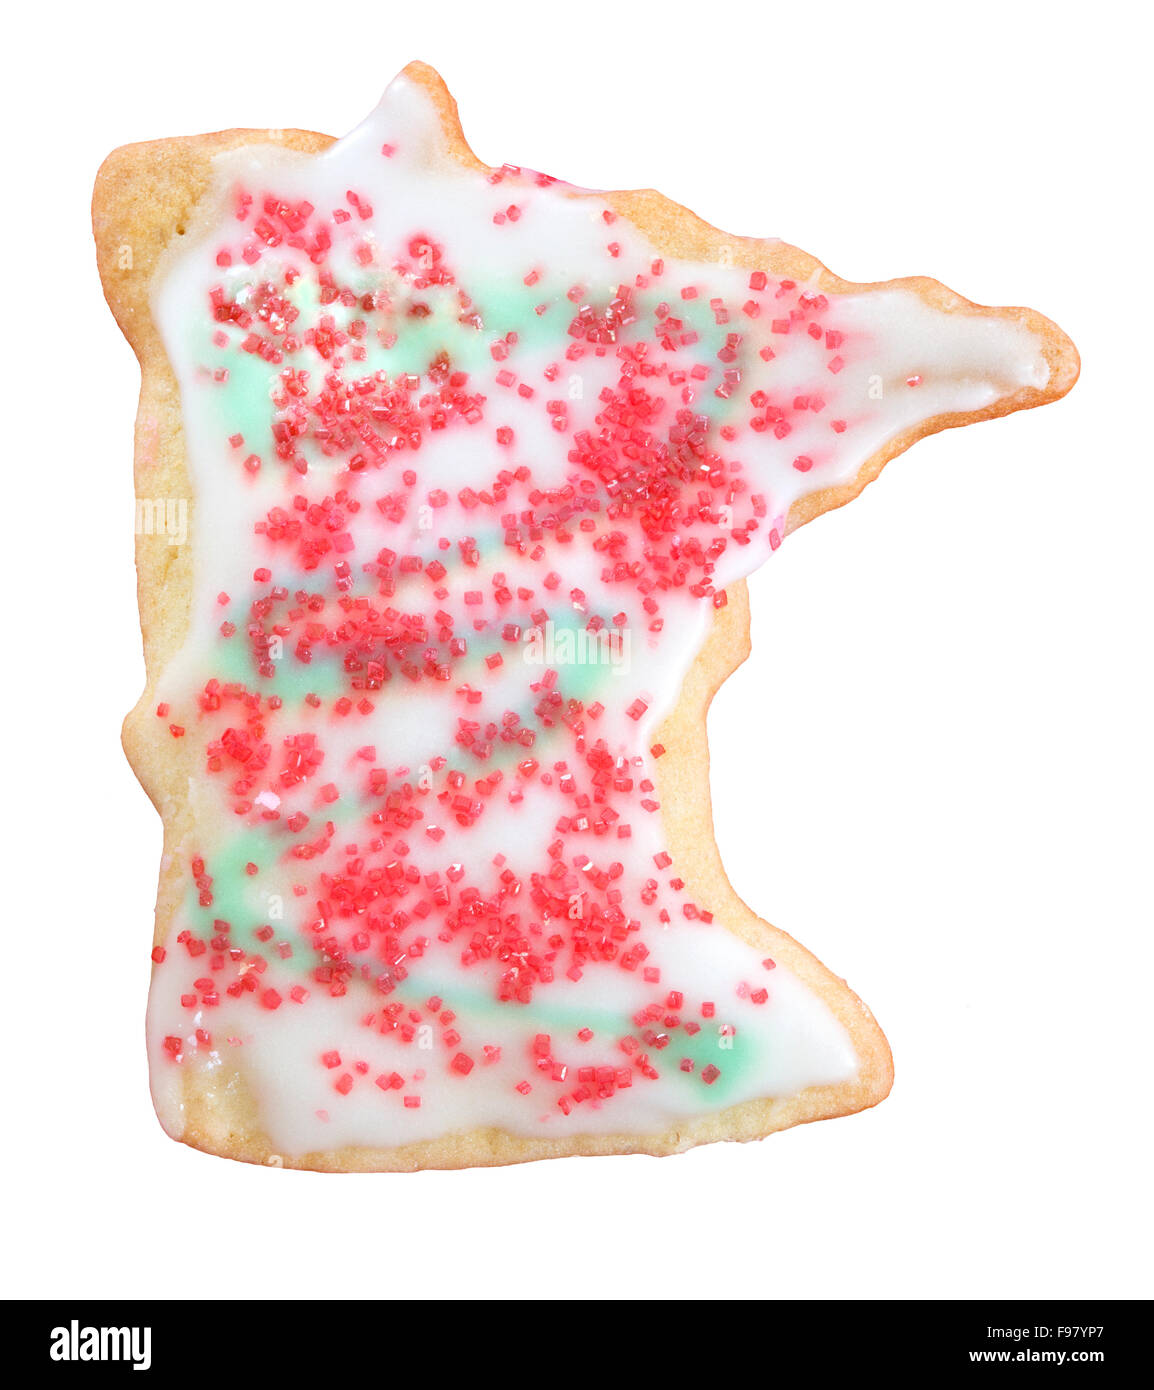 A holiday sugar cookie shaped like the US state of Minnesota with frosting and sugar sprinkles Stock Photo